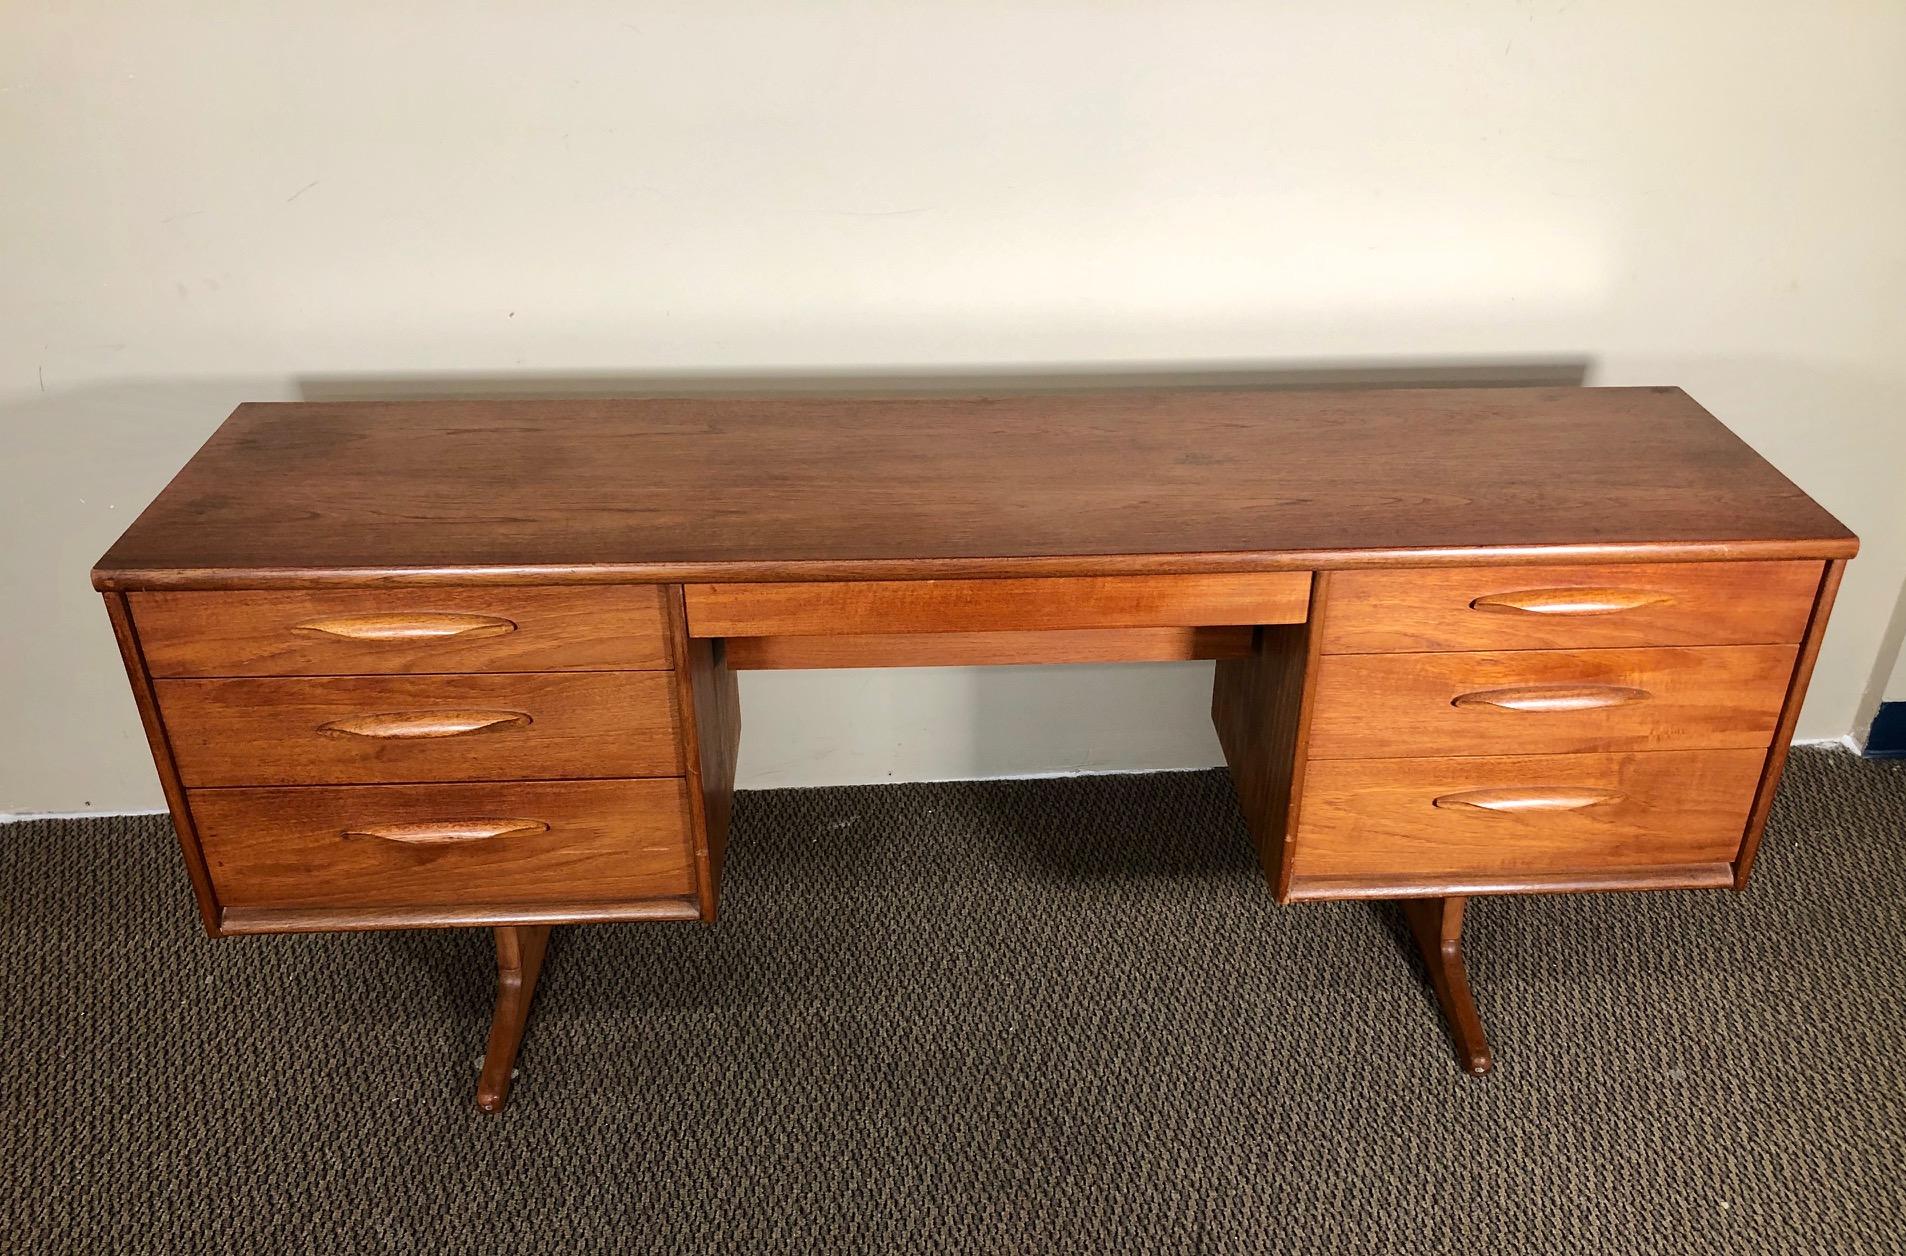 Fantastic teak vanity or desk by Austinsuite. Originally designed as a vanity but can also be used as a desk.
It has 3 drawers with beautiful sculpted teak handles on each side and one secret drawer in the middle.
The back is